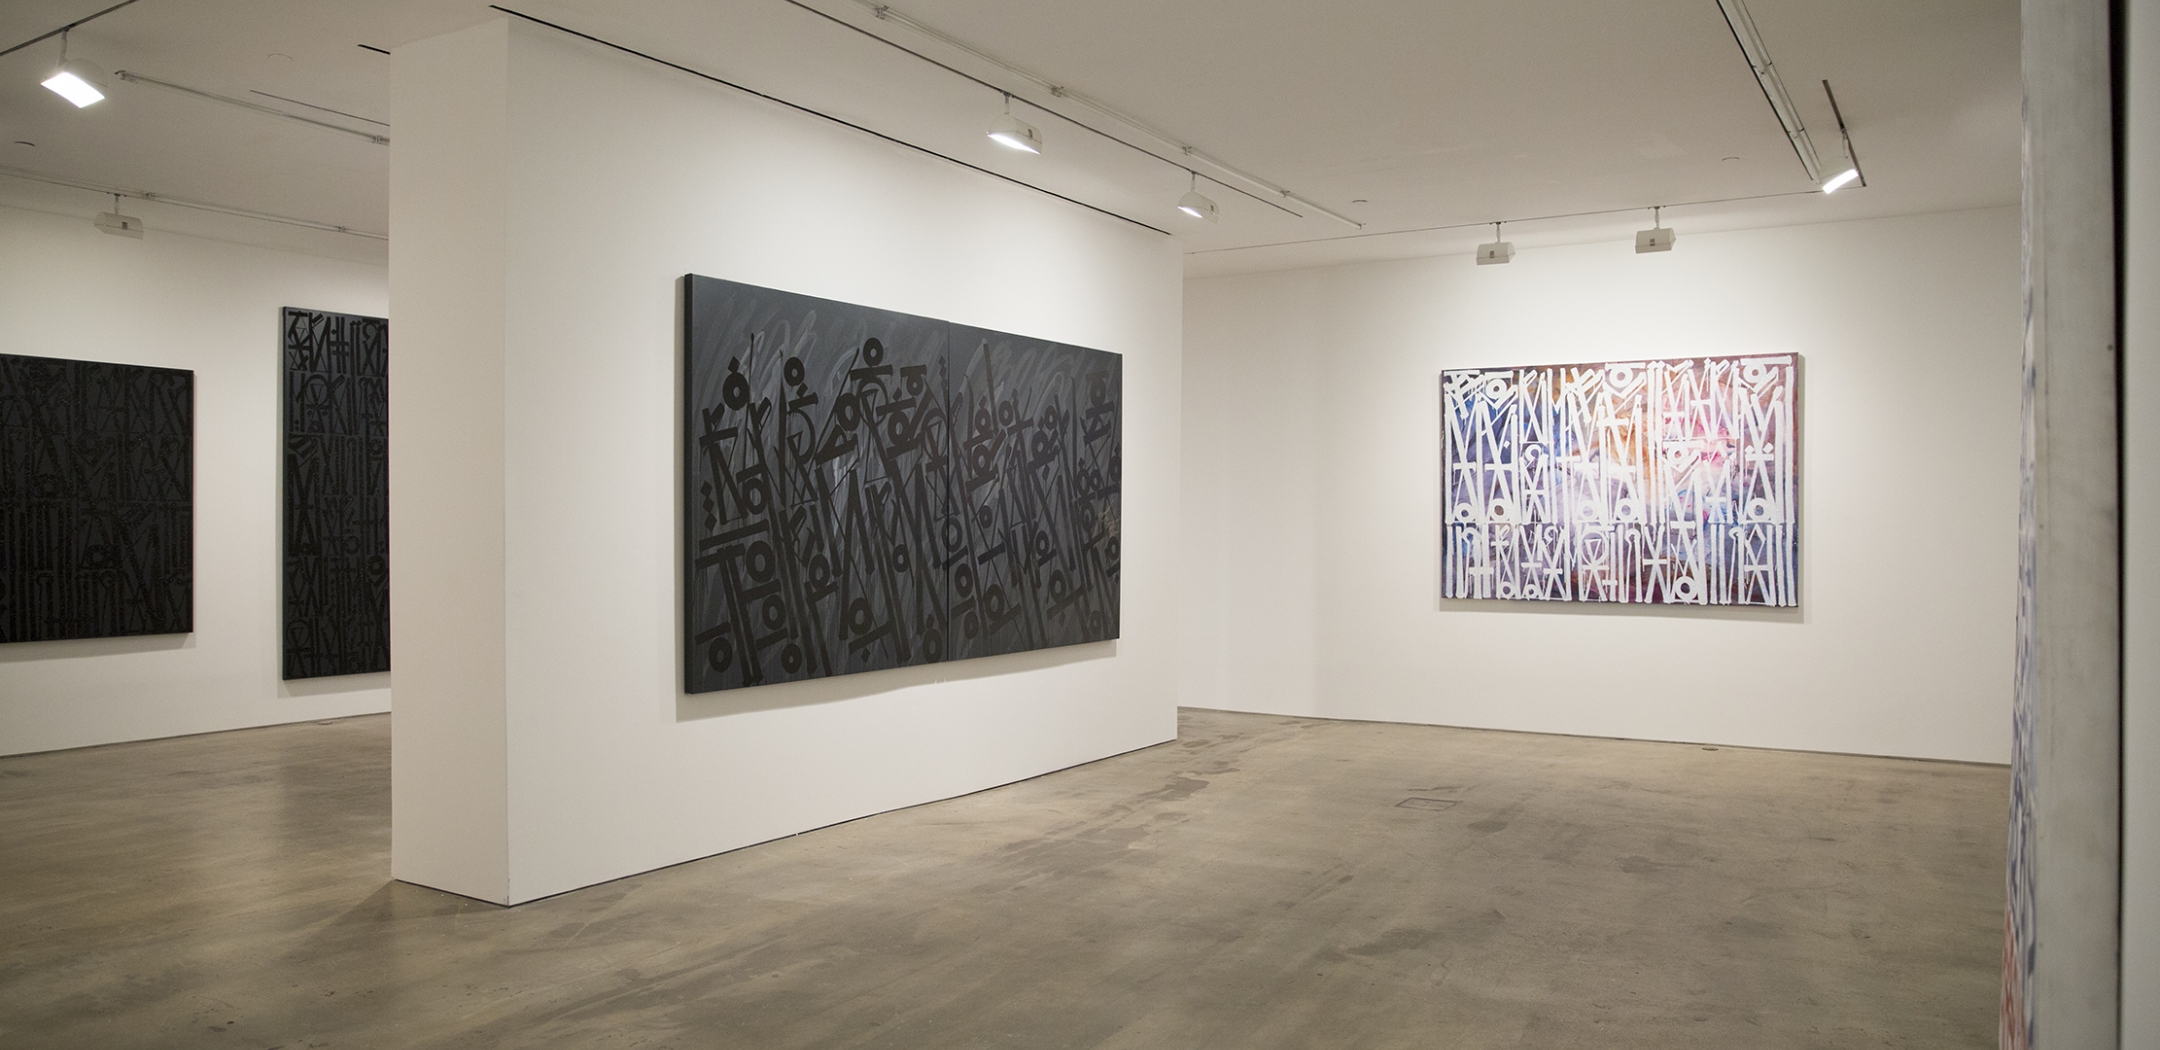 RETNA Installation at HG Contemporary Art gallery in Chelsea, Nyc